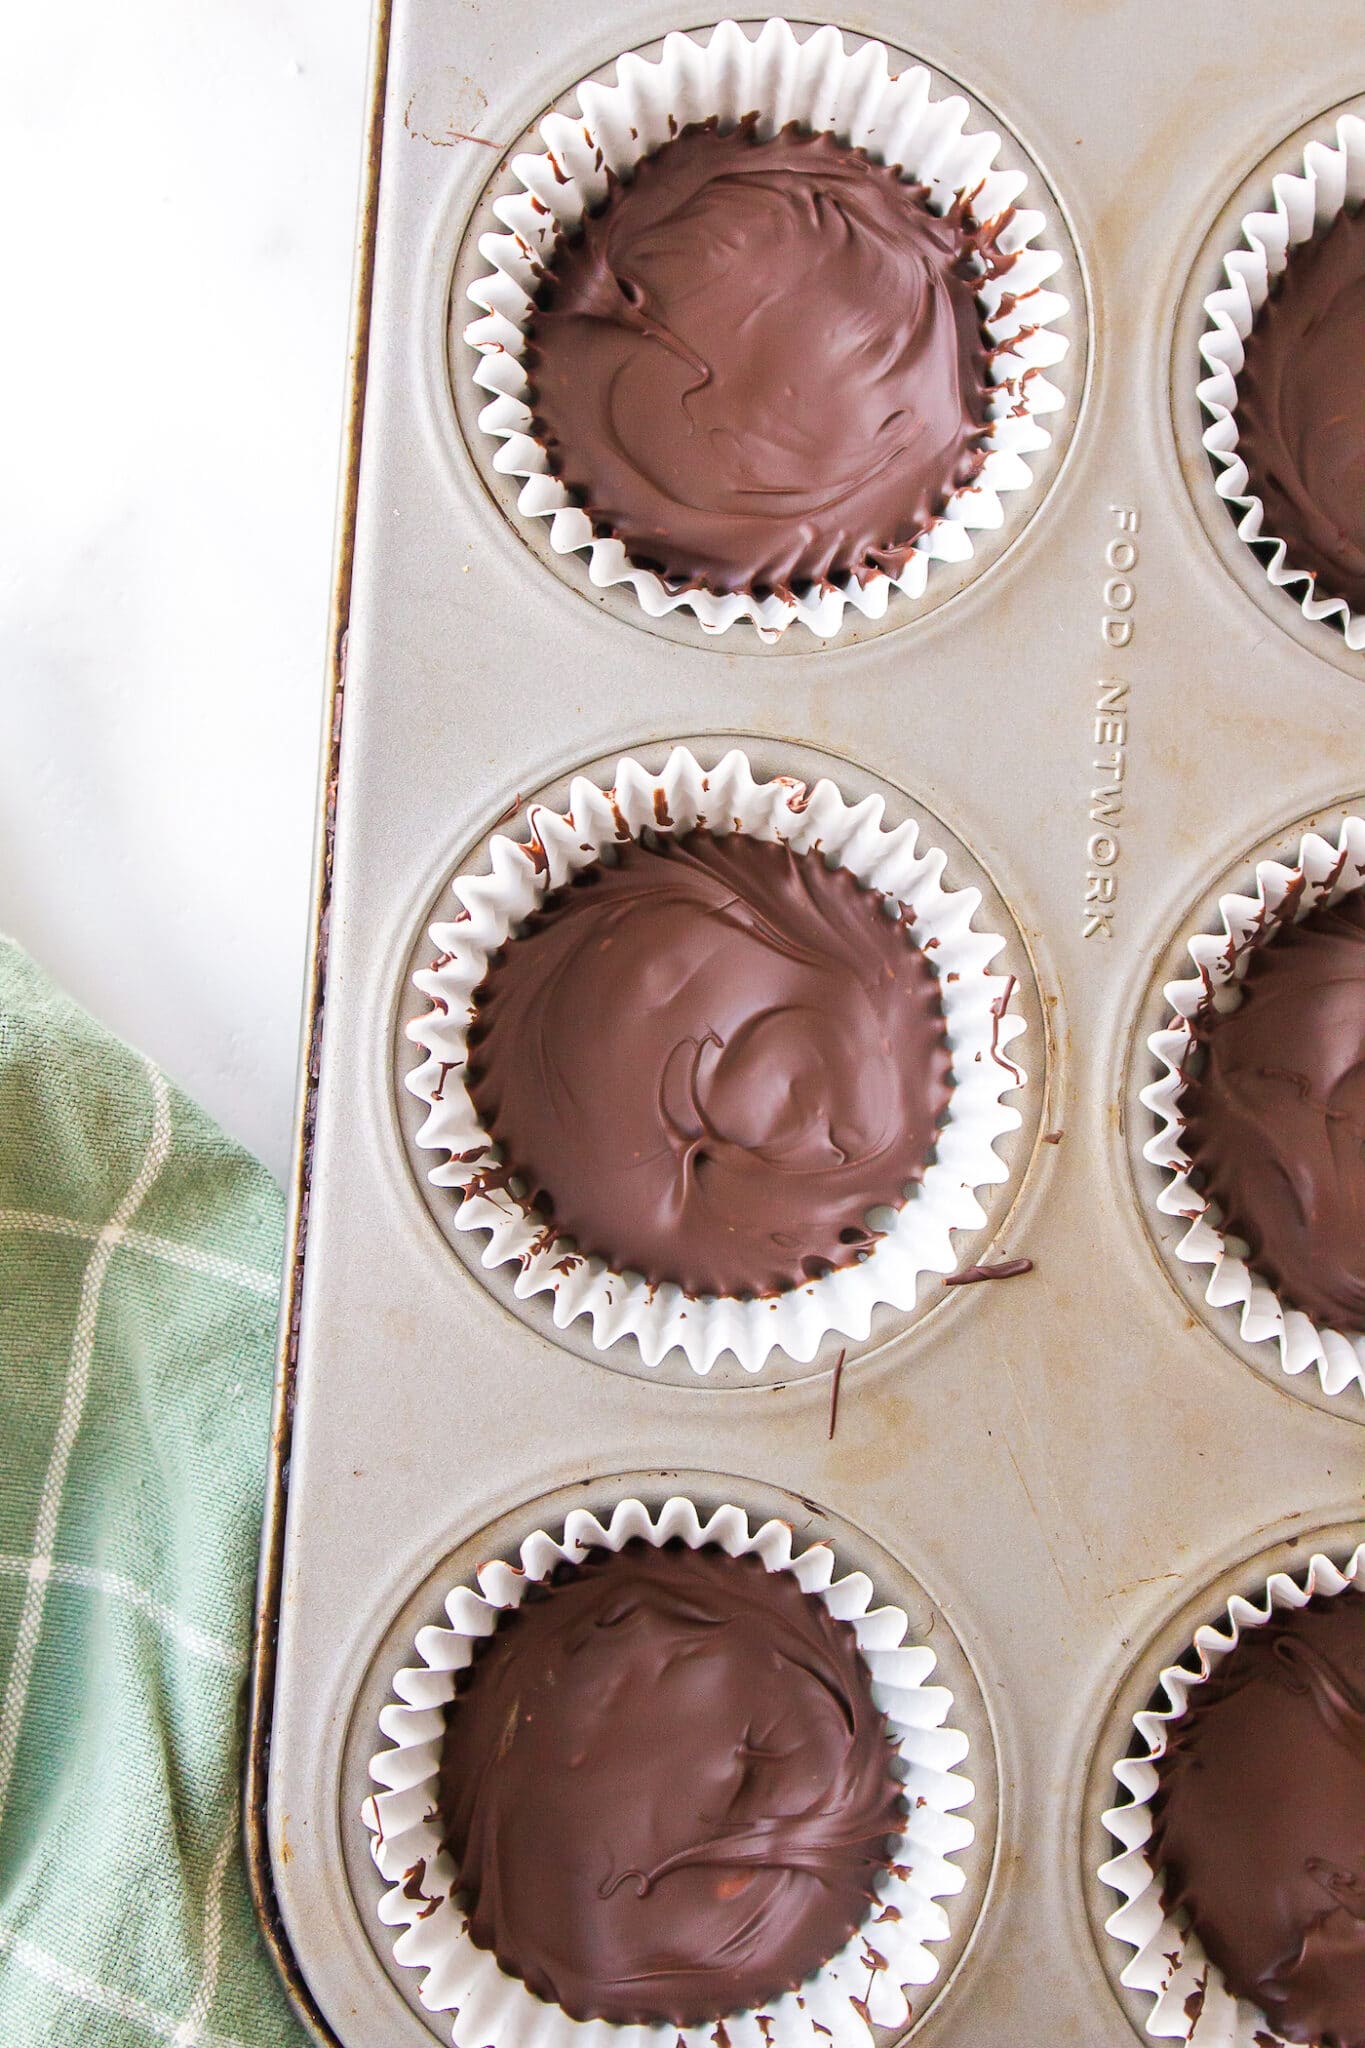 Vegan peppermint patties chilling in a muffin tin.